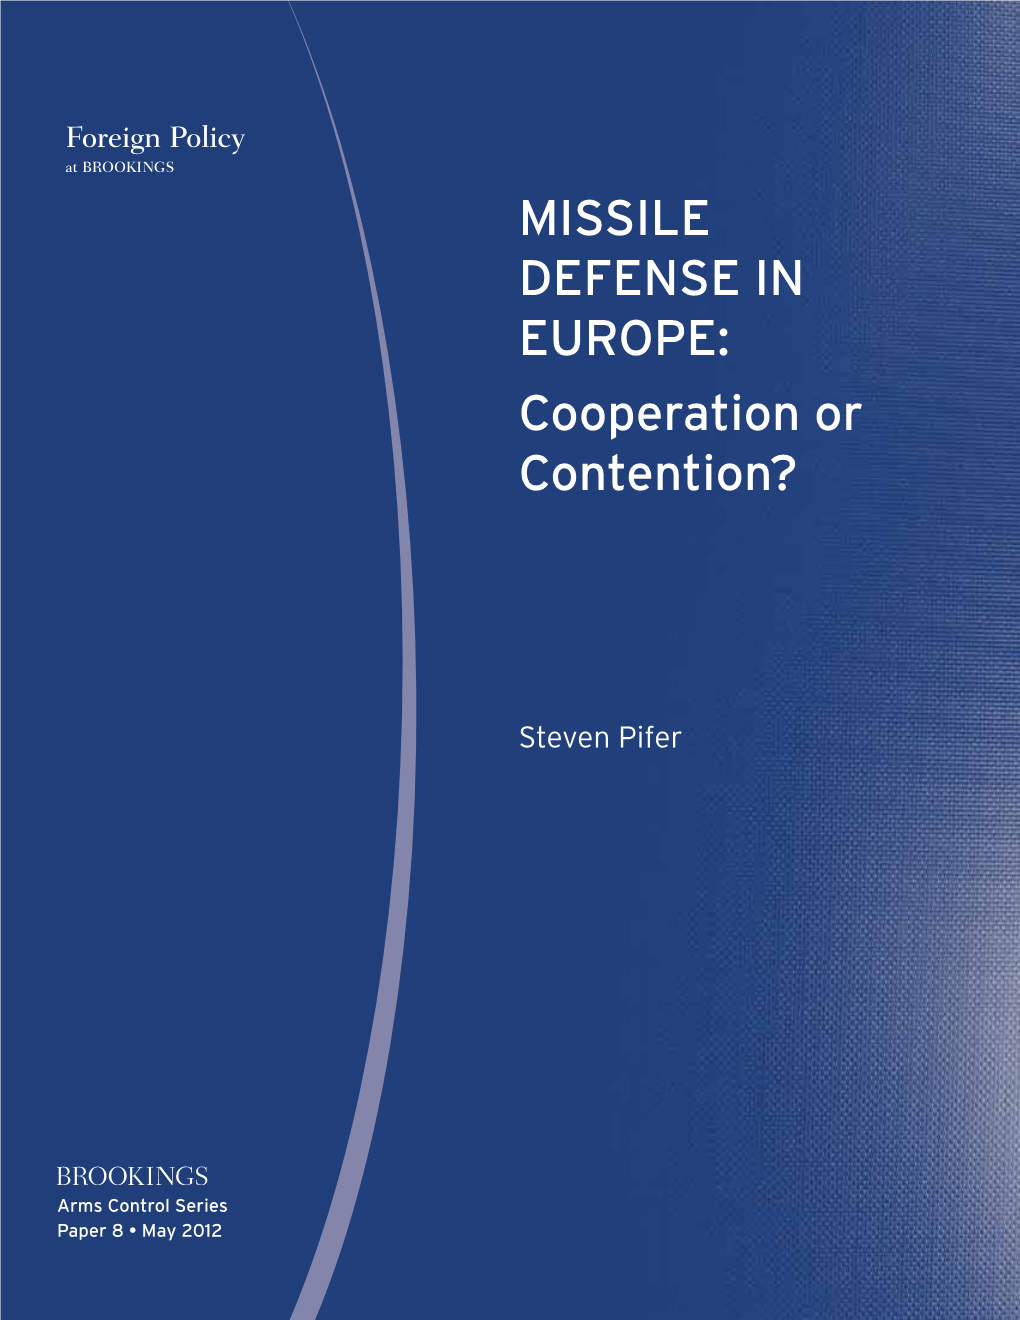 MISSILE DEFENSE in EUROPE: Cooperation Or Contention?